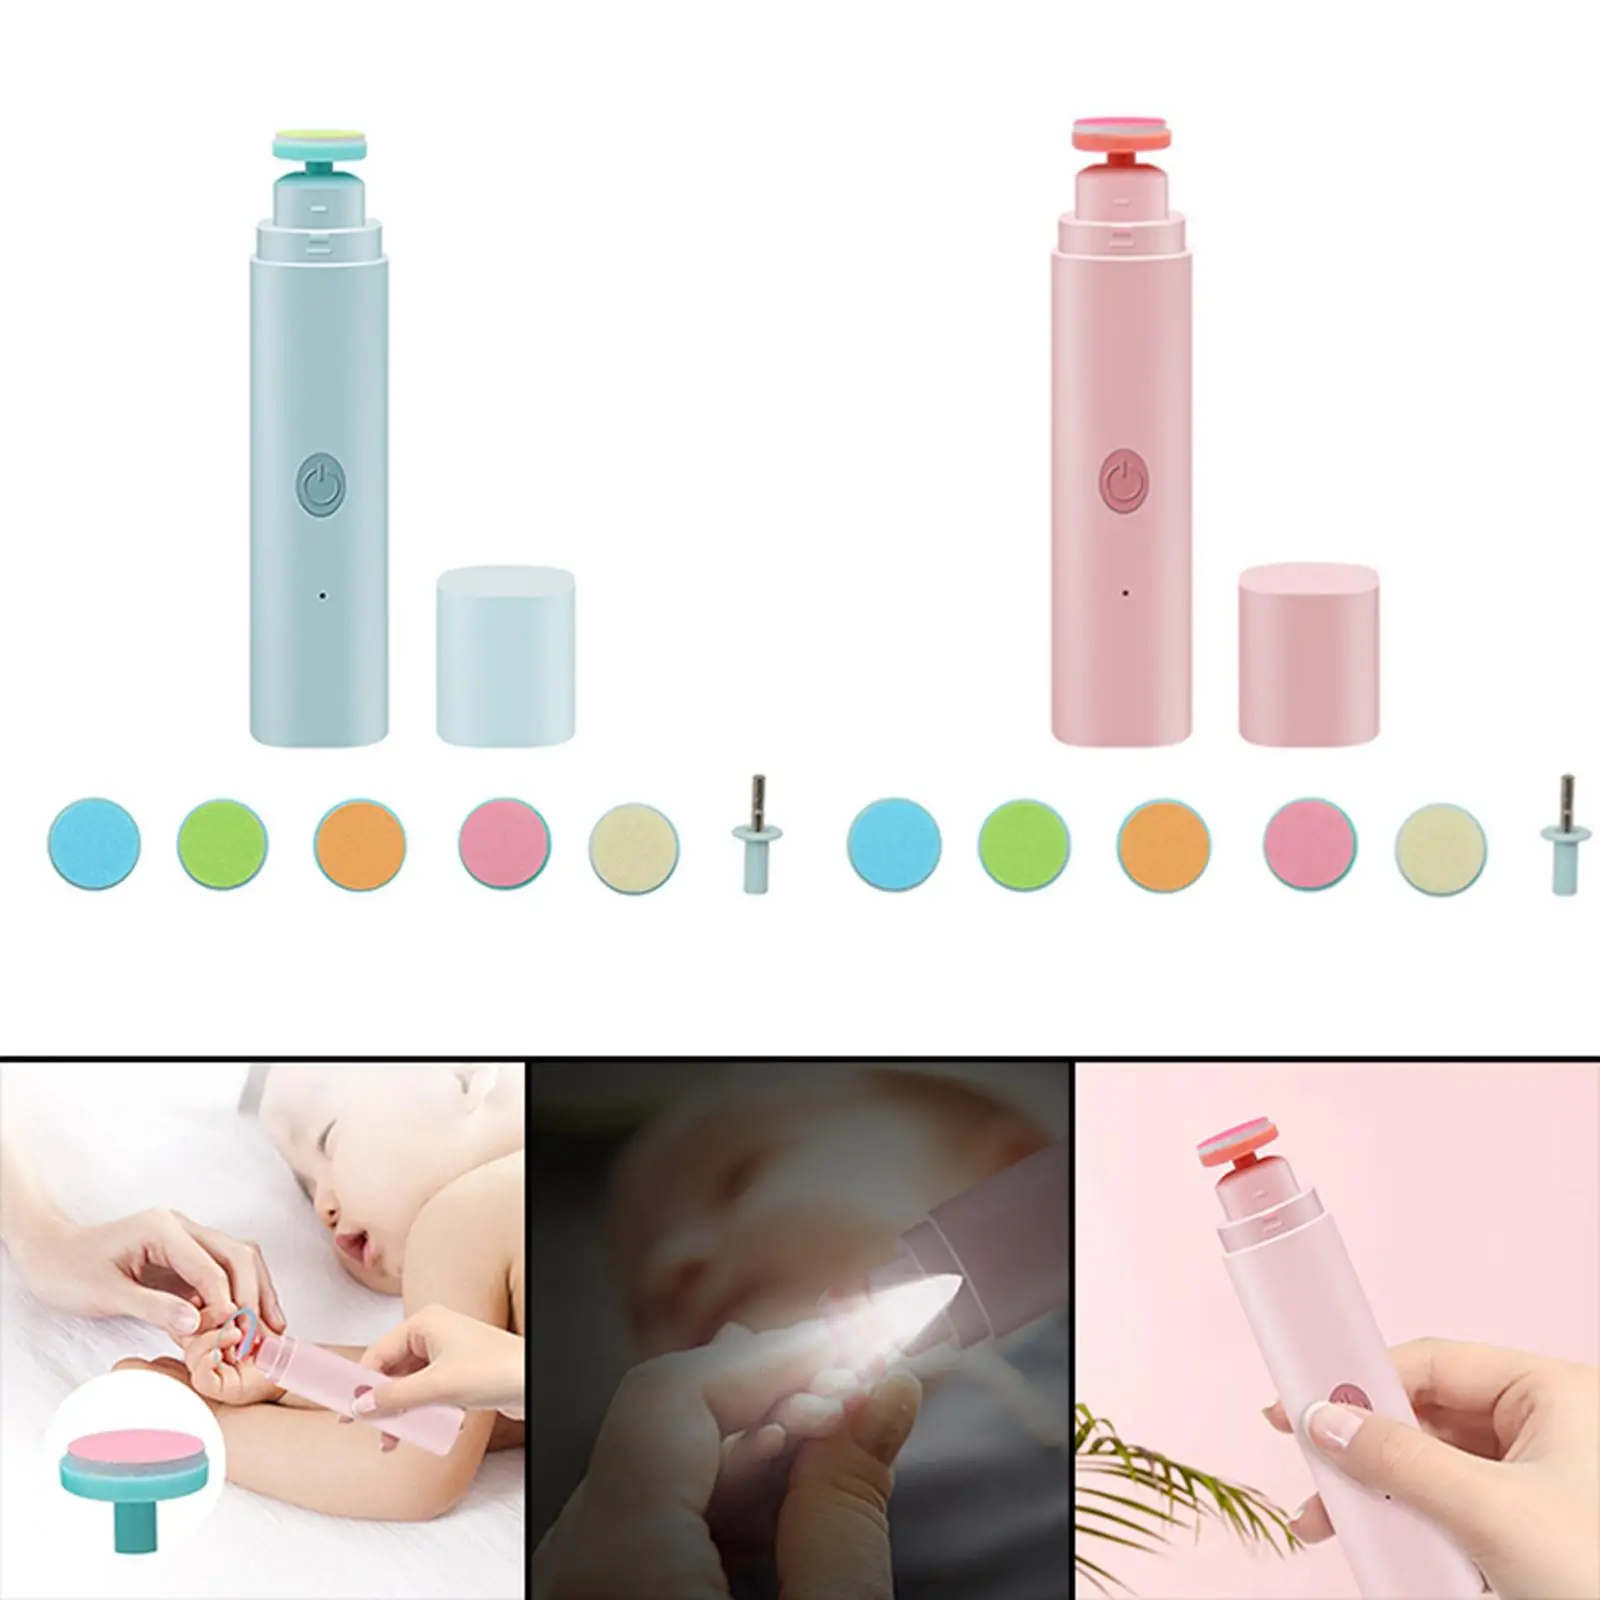 Baby Nail File Drill Polish Safety LED Light Trim Manicure Care Grooming 6 in 1 Clipper Cutter for Newborn Toes Fingers Infant